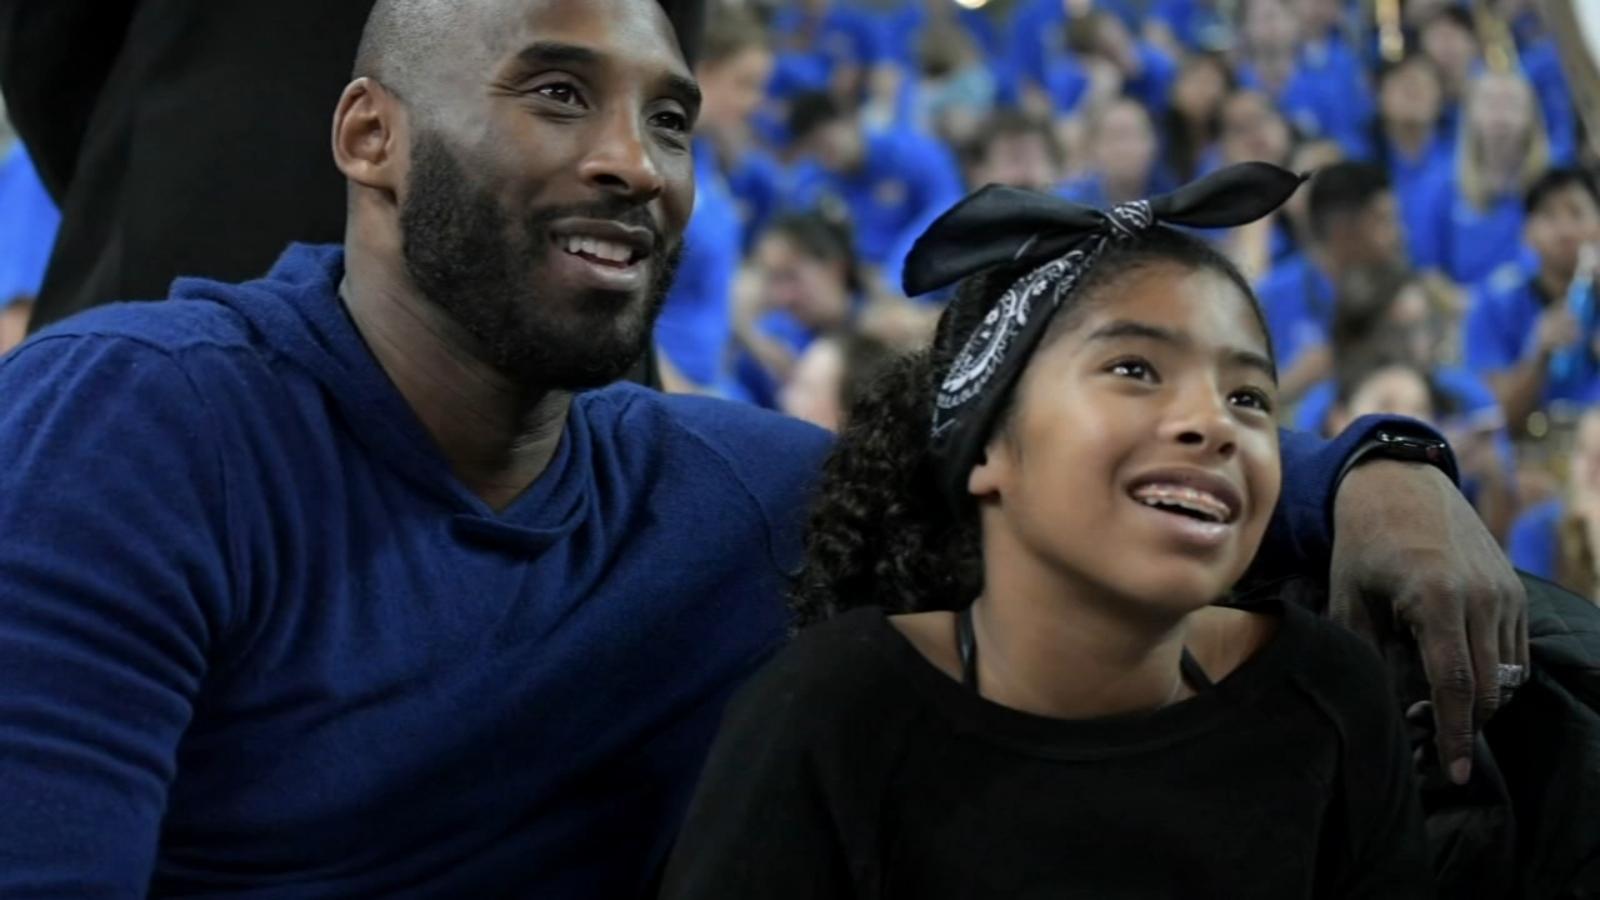 Kobe Bryant's emerging advocacy for women's sports spurred by daughter Gianna 'Gigi' Bryant, also killed in crash